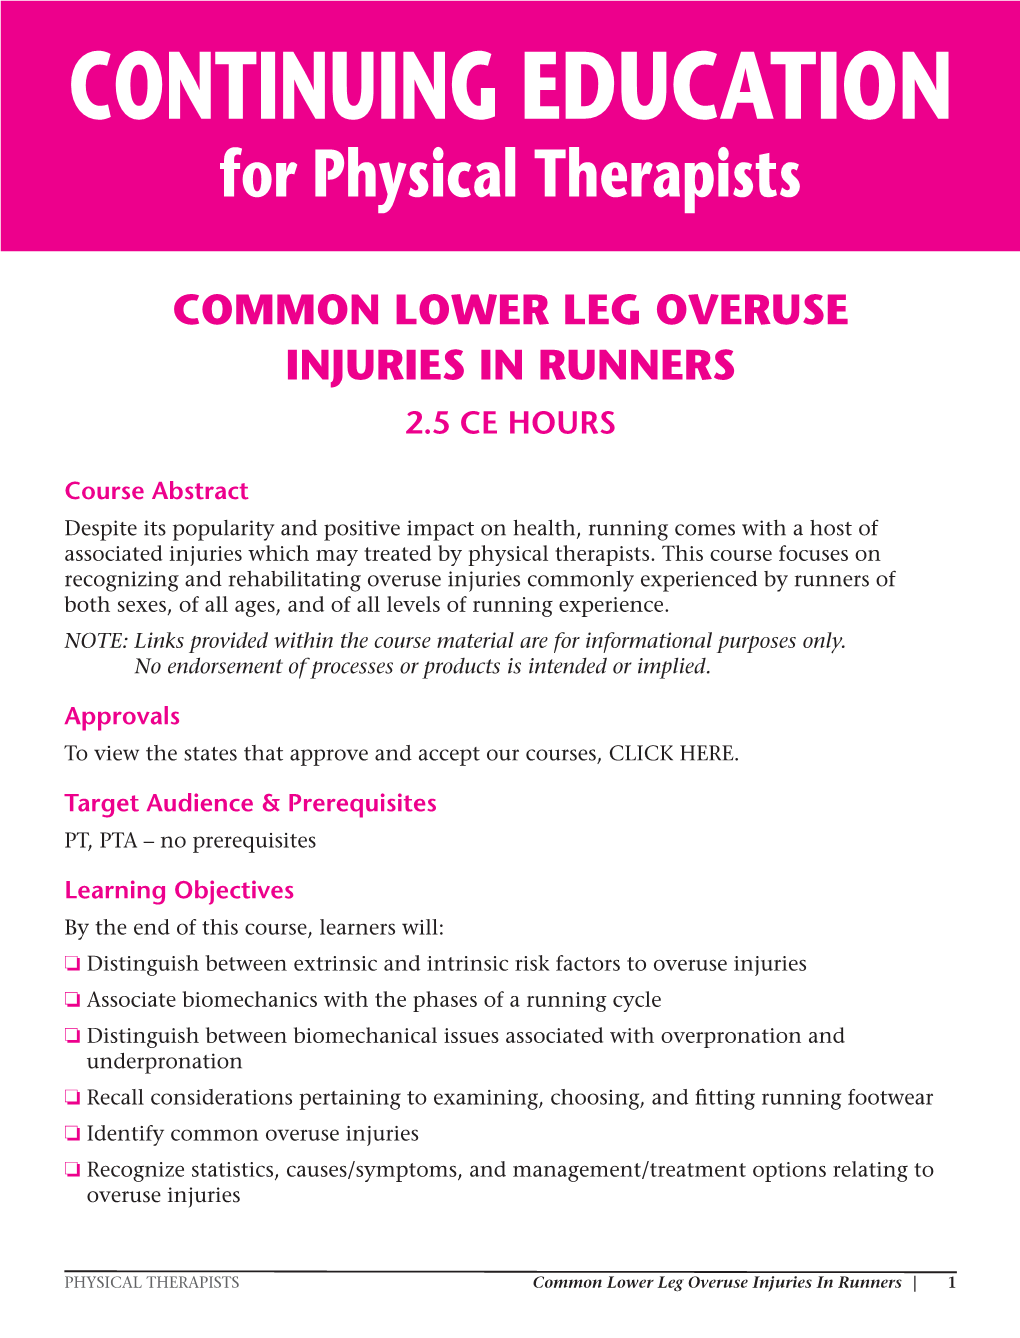 Common Lower Leg Overuse Injuries in Runners 2.5 Ce Hours